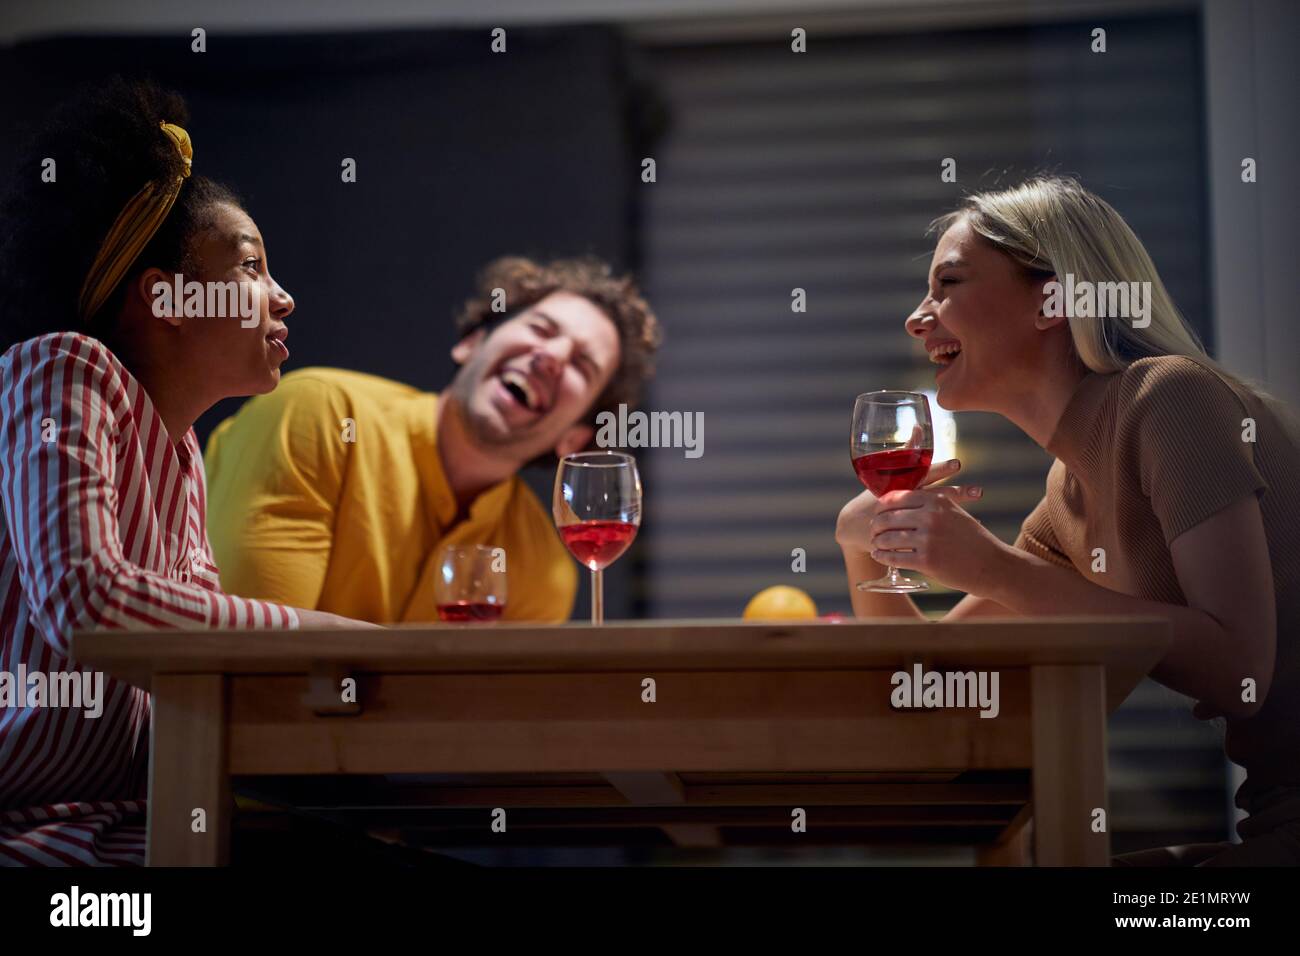 Friends having fun while drinking wine in a cheerful atmosphere at the kitchen. Dinner, friendship, together, home Stock Photo